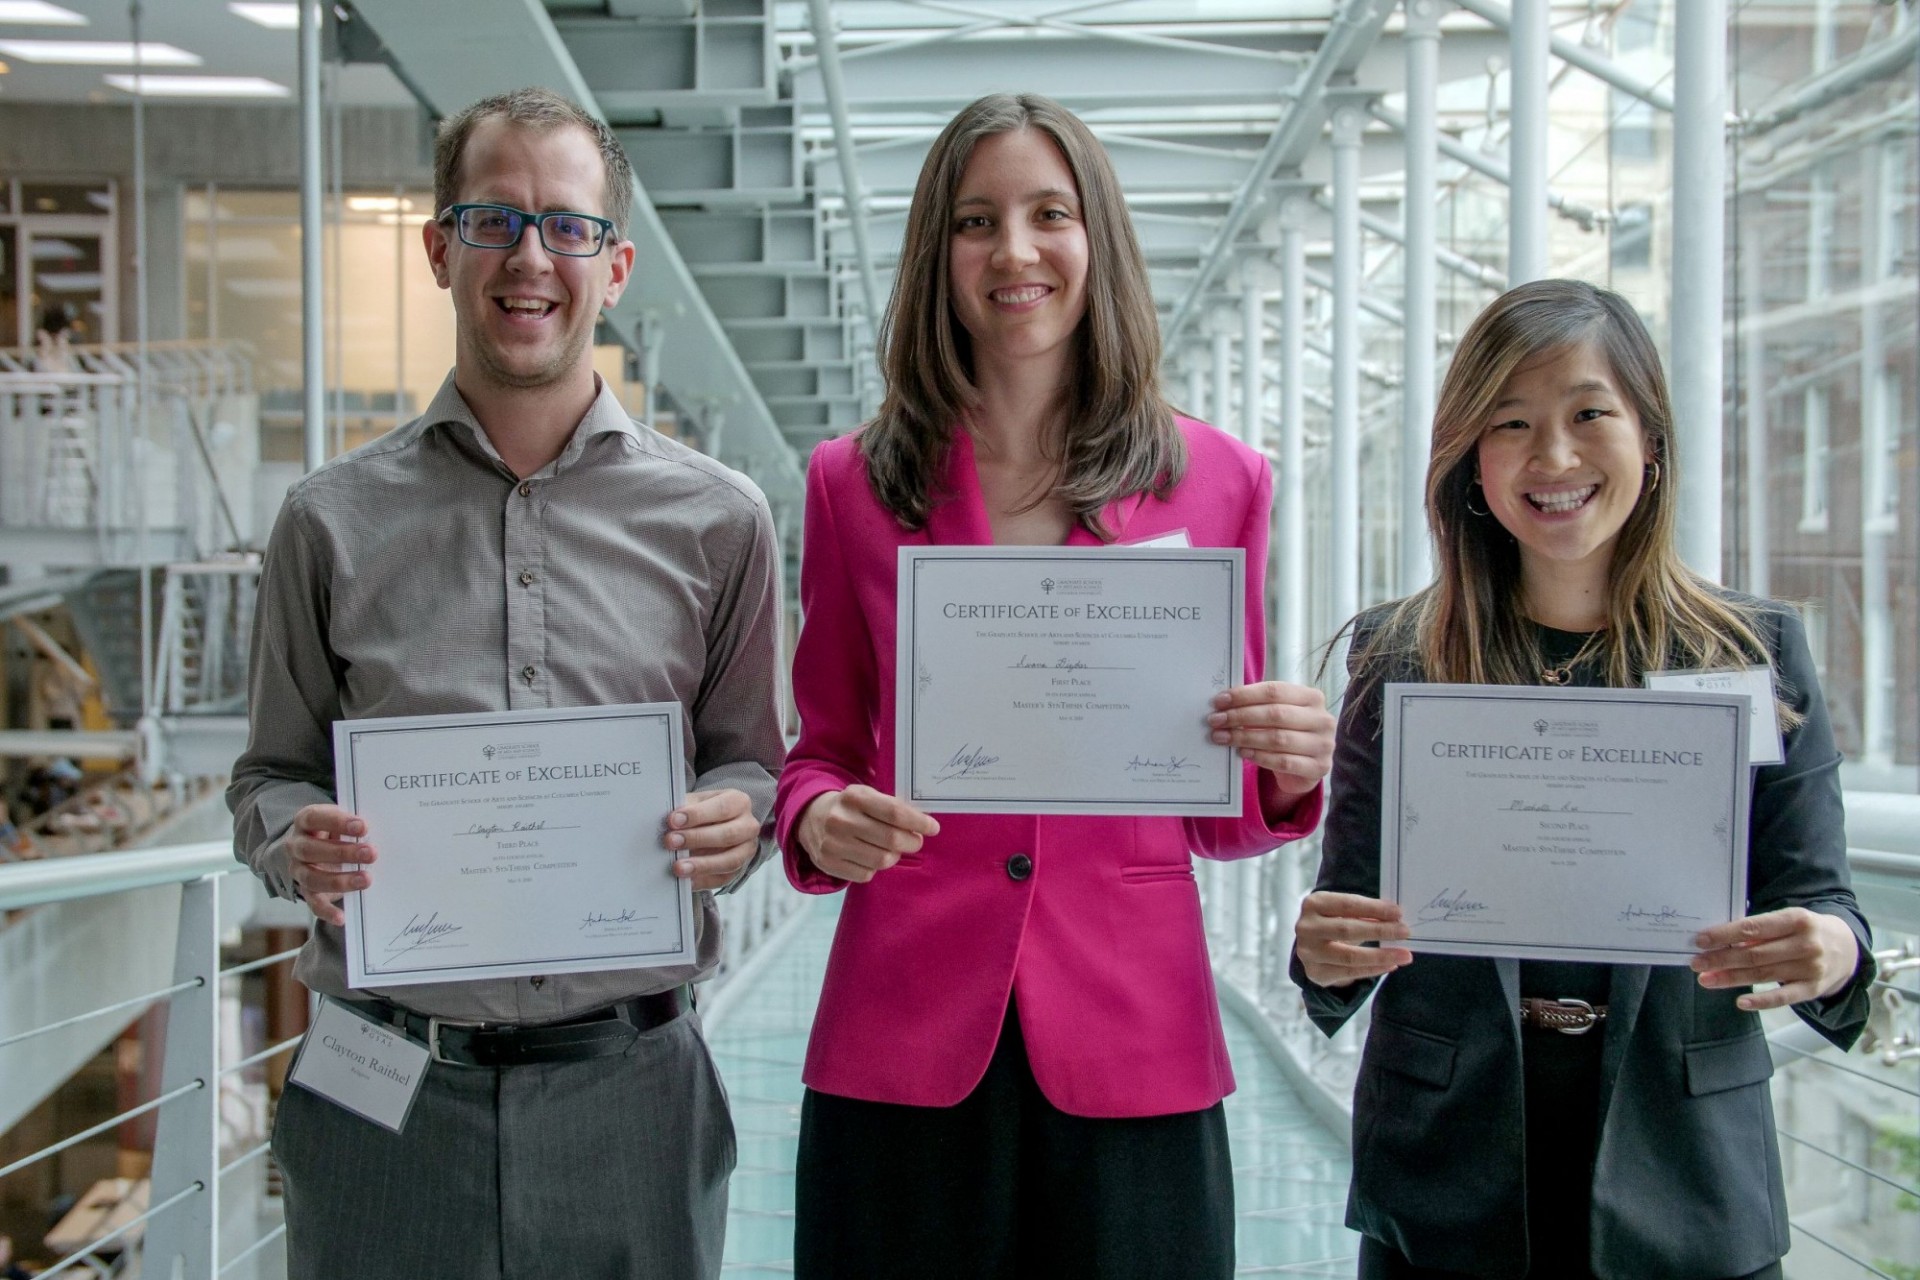 Winners of the MA SynThesis Competition, left to right: Clayton Raithel, Ivana Dizdar, Michelle Lee